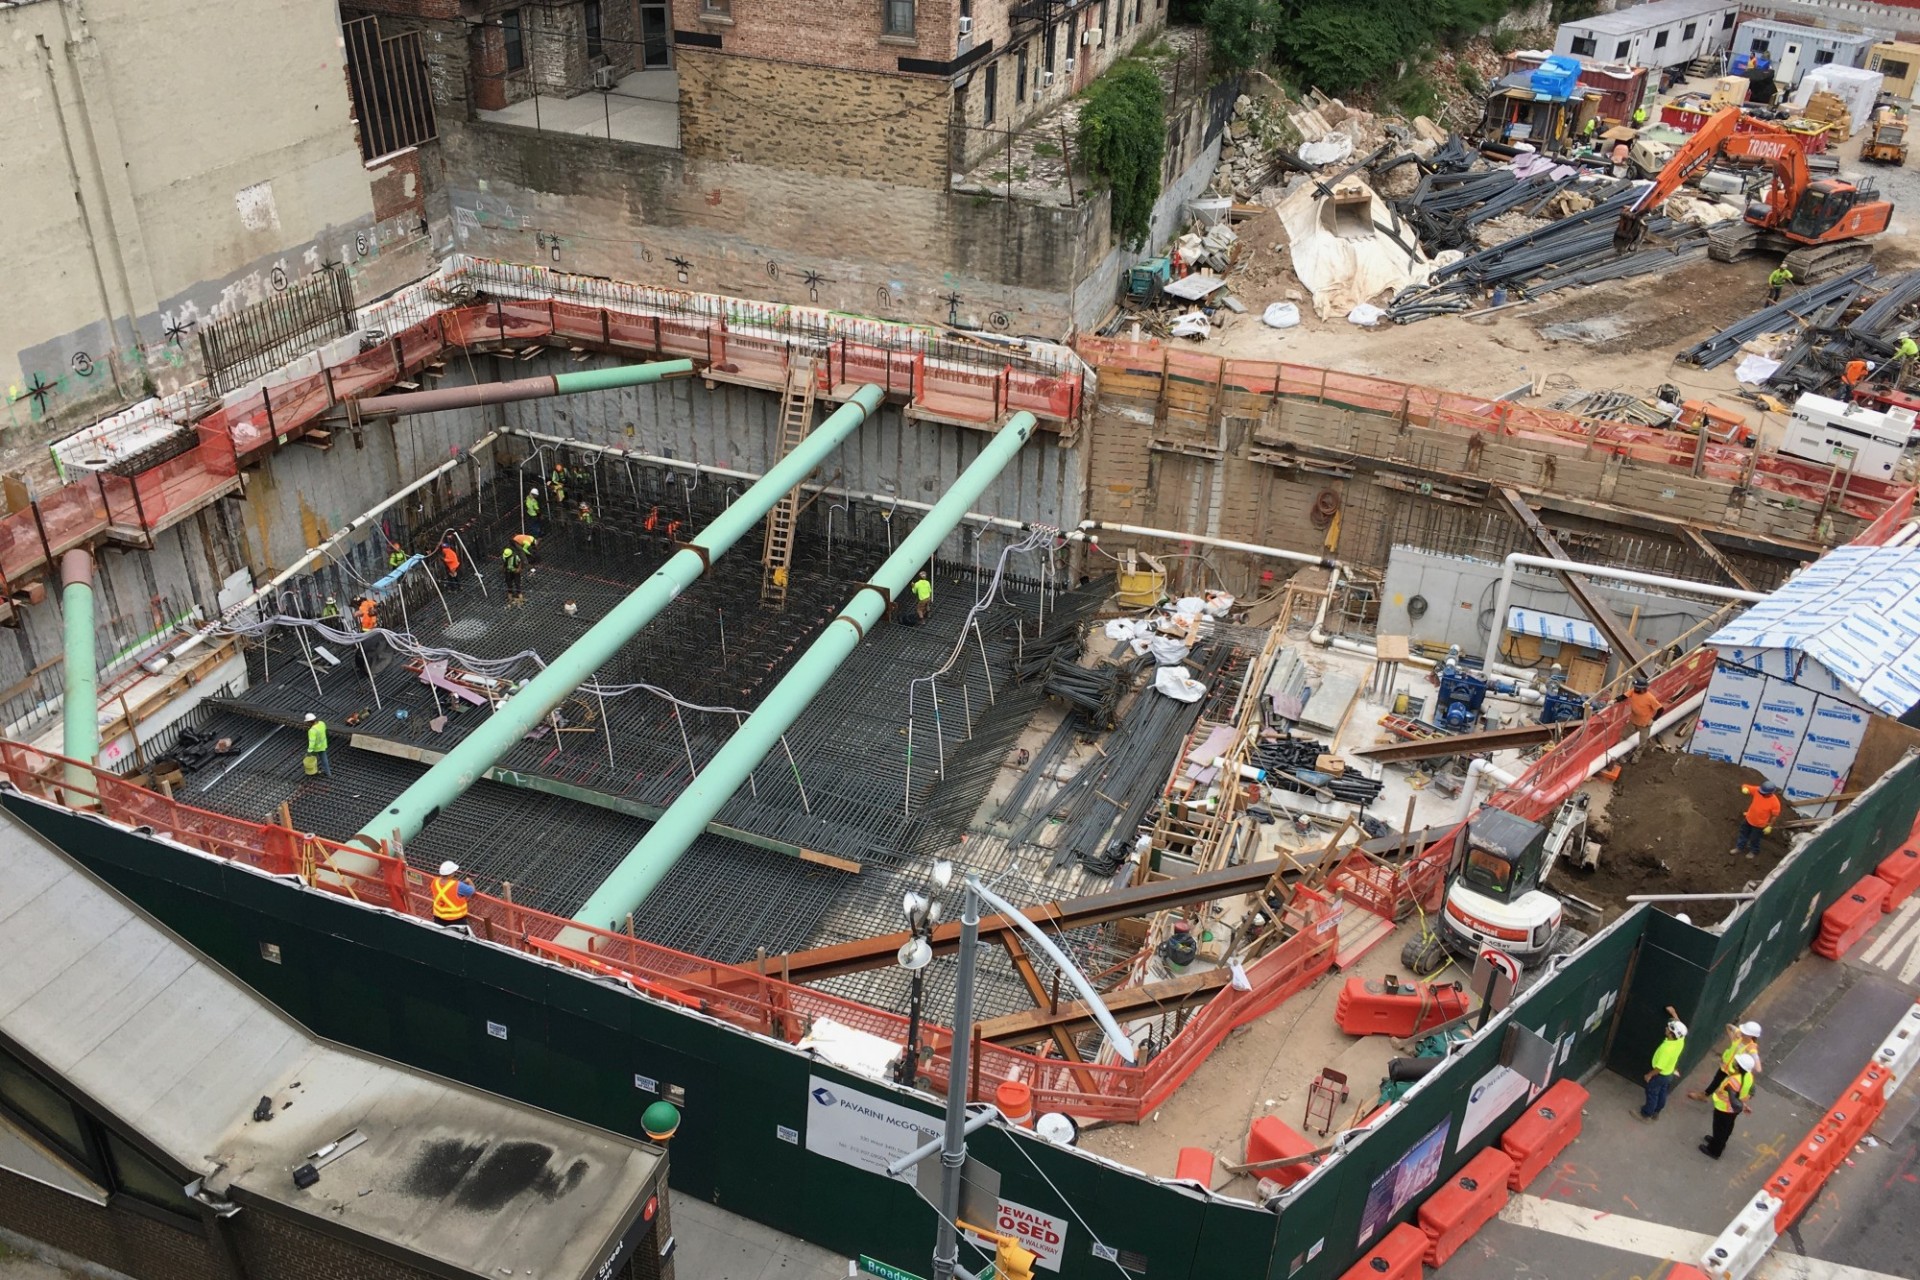 An aerial view of the 600 W. 125th Street construction site, with rebar covering half of the site, green pipes overhead, and equipment on the other half to perform foundation work.